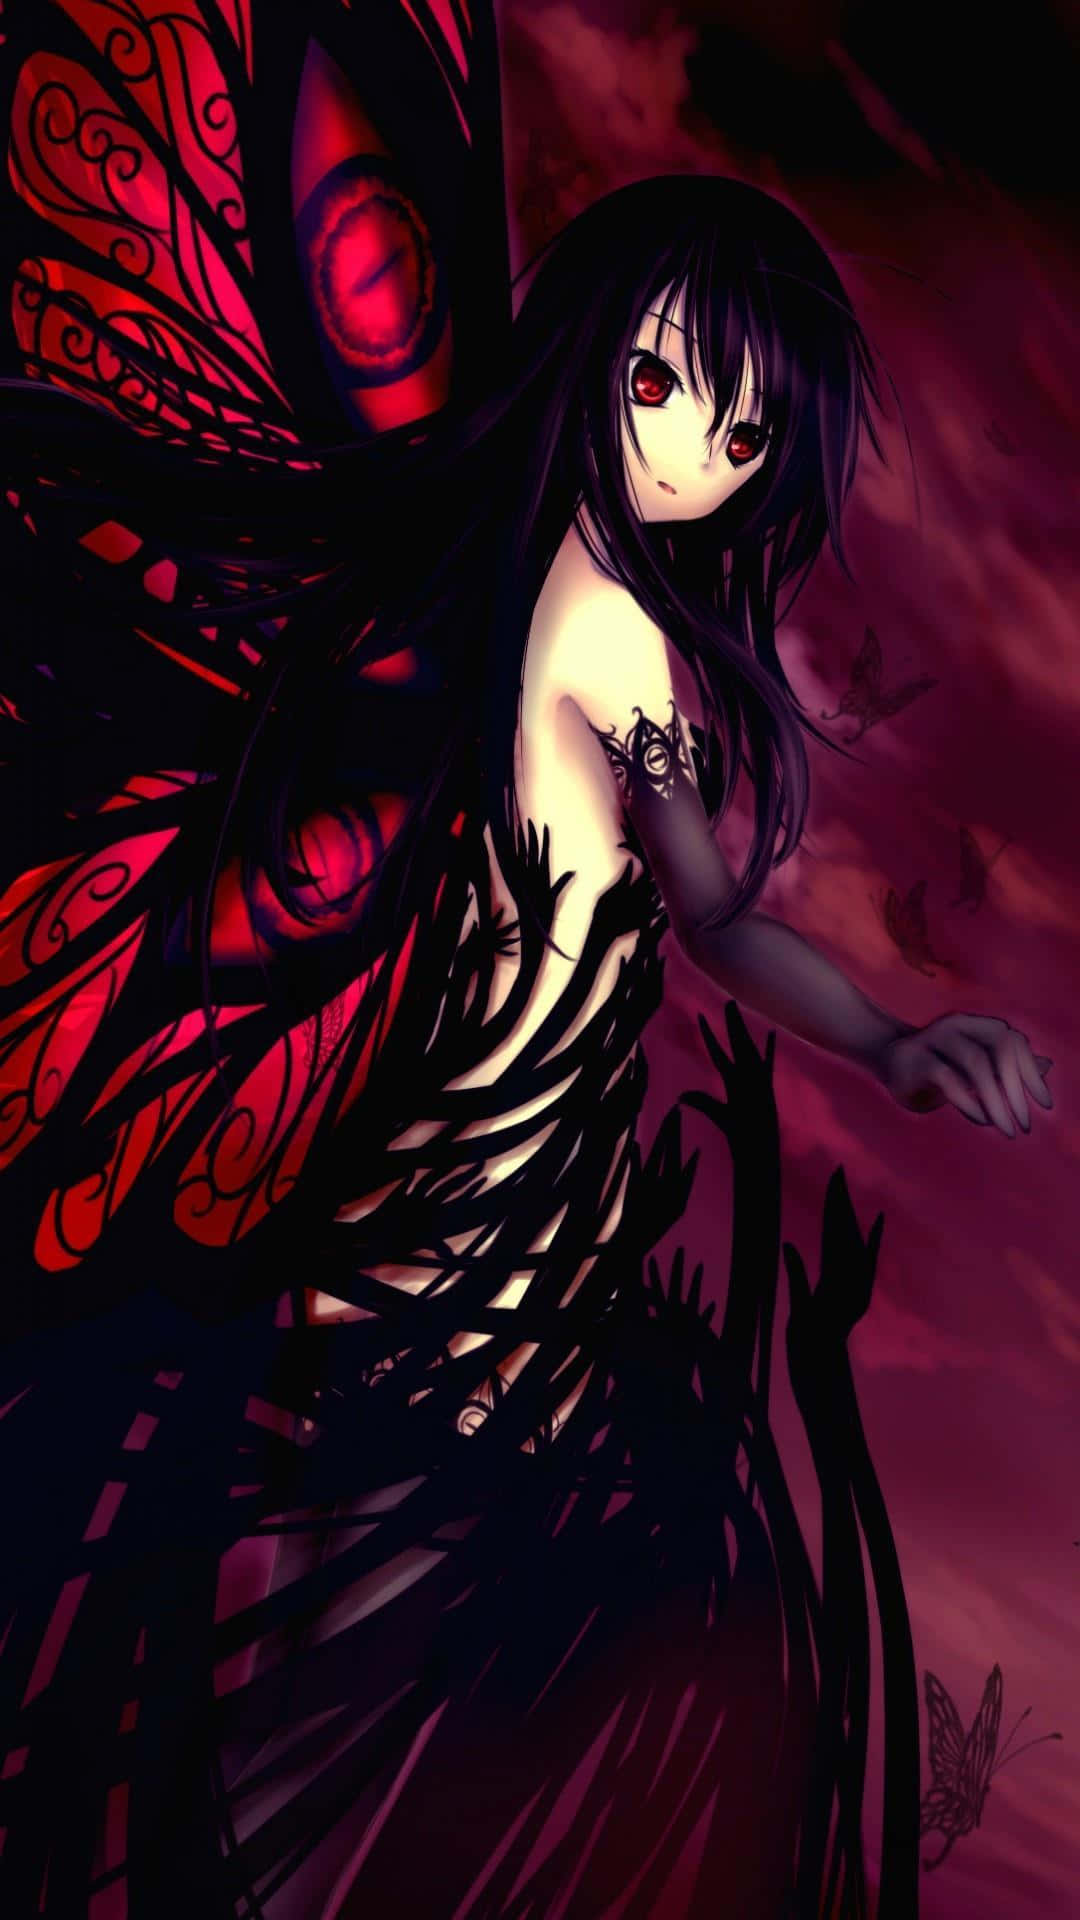 Download Fascinating Gothic Anime Iphone Lock Screen Wallpaper | Wallpapers .com